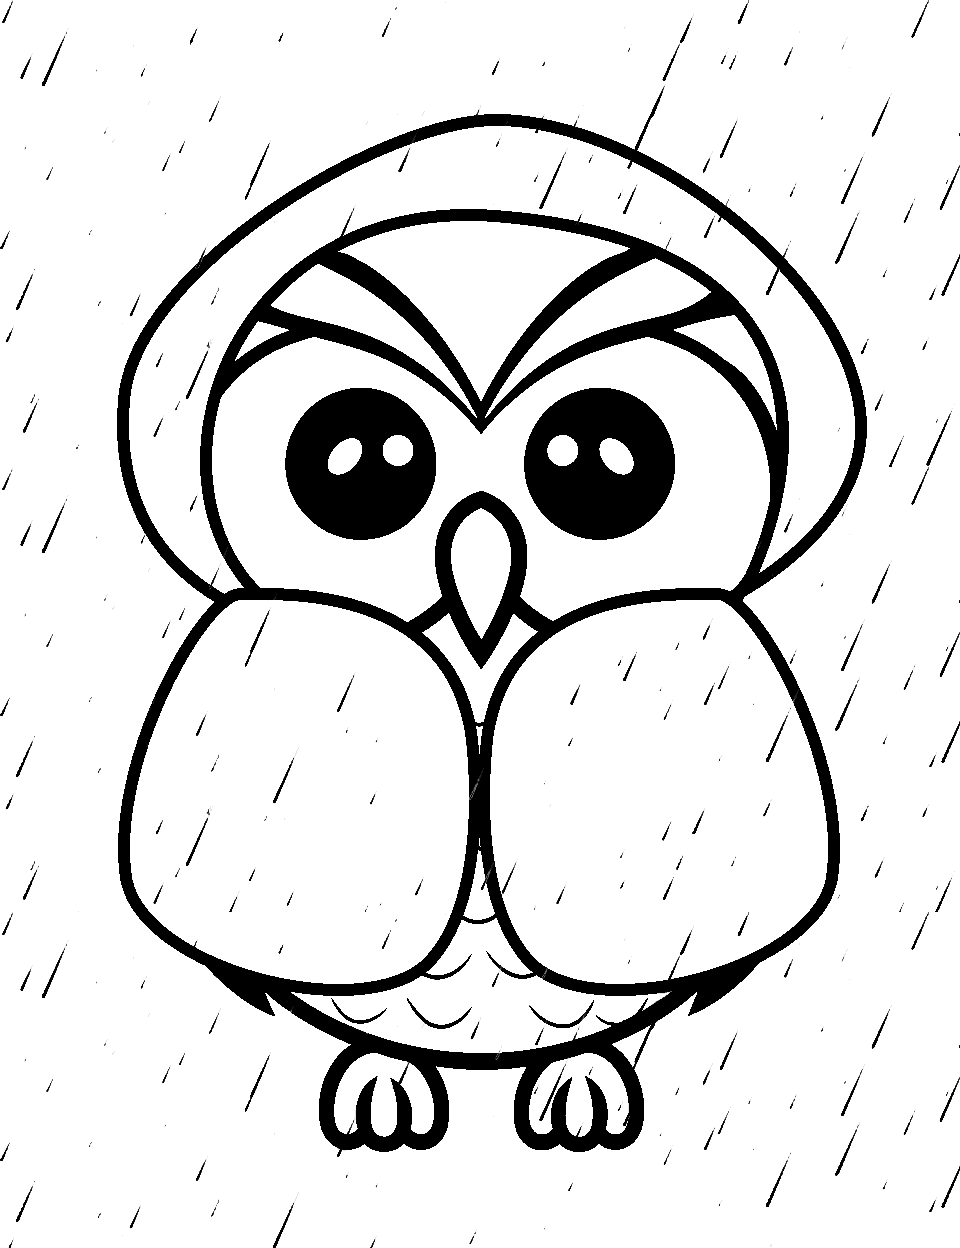 Owl in a Raincoat Coloring Page - A cheerful owl wearing a raincoat during a rainstorm.